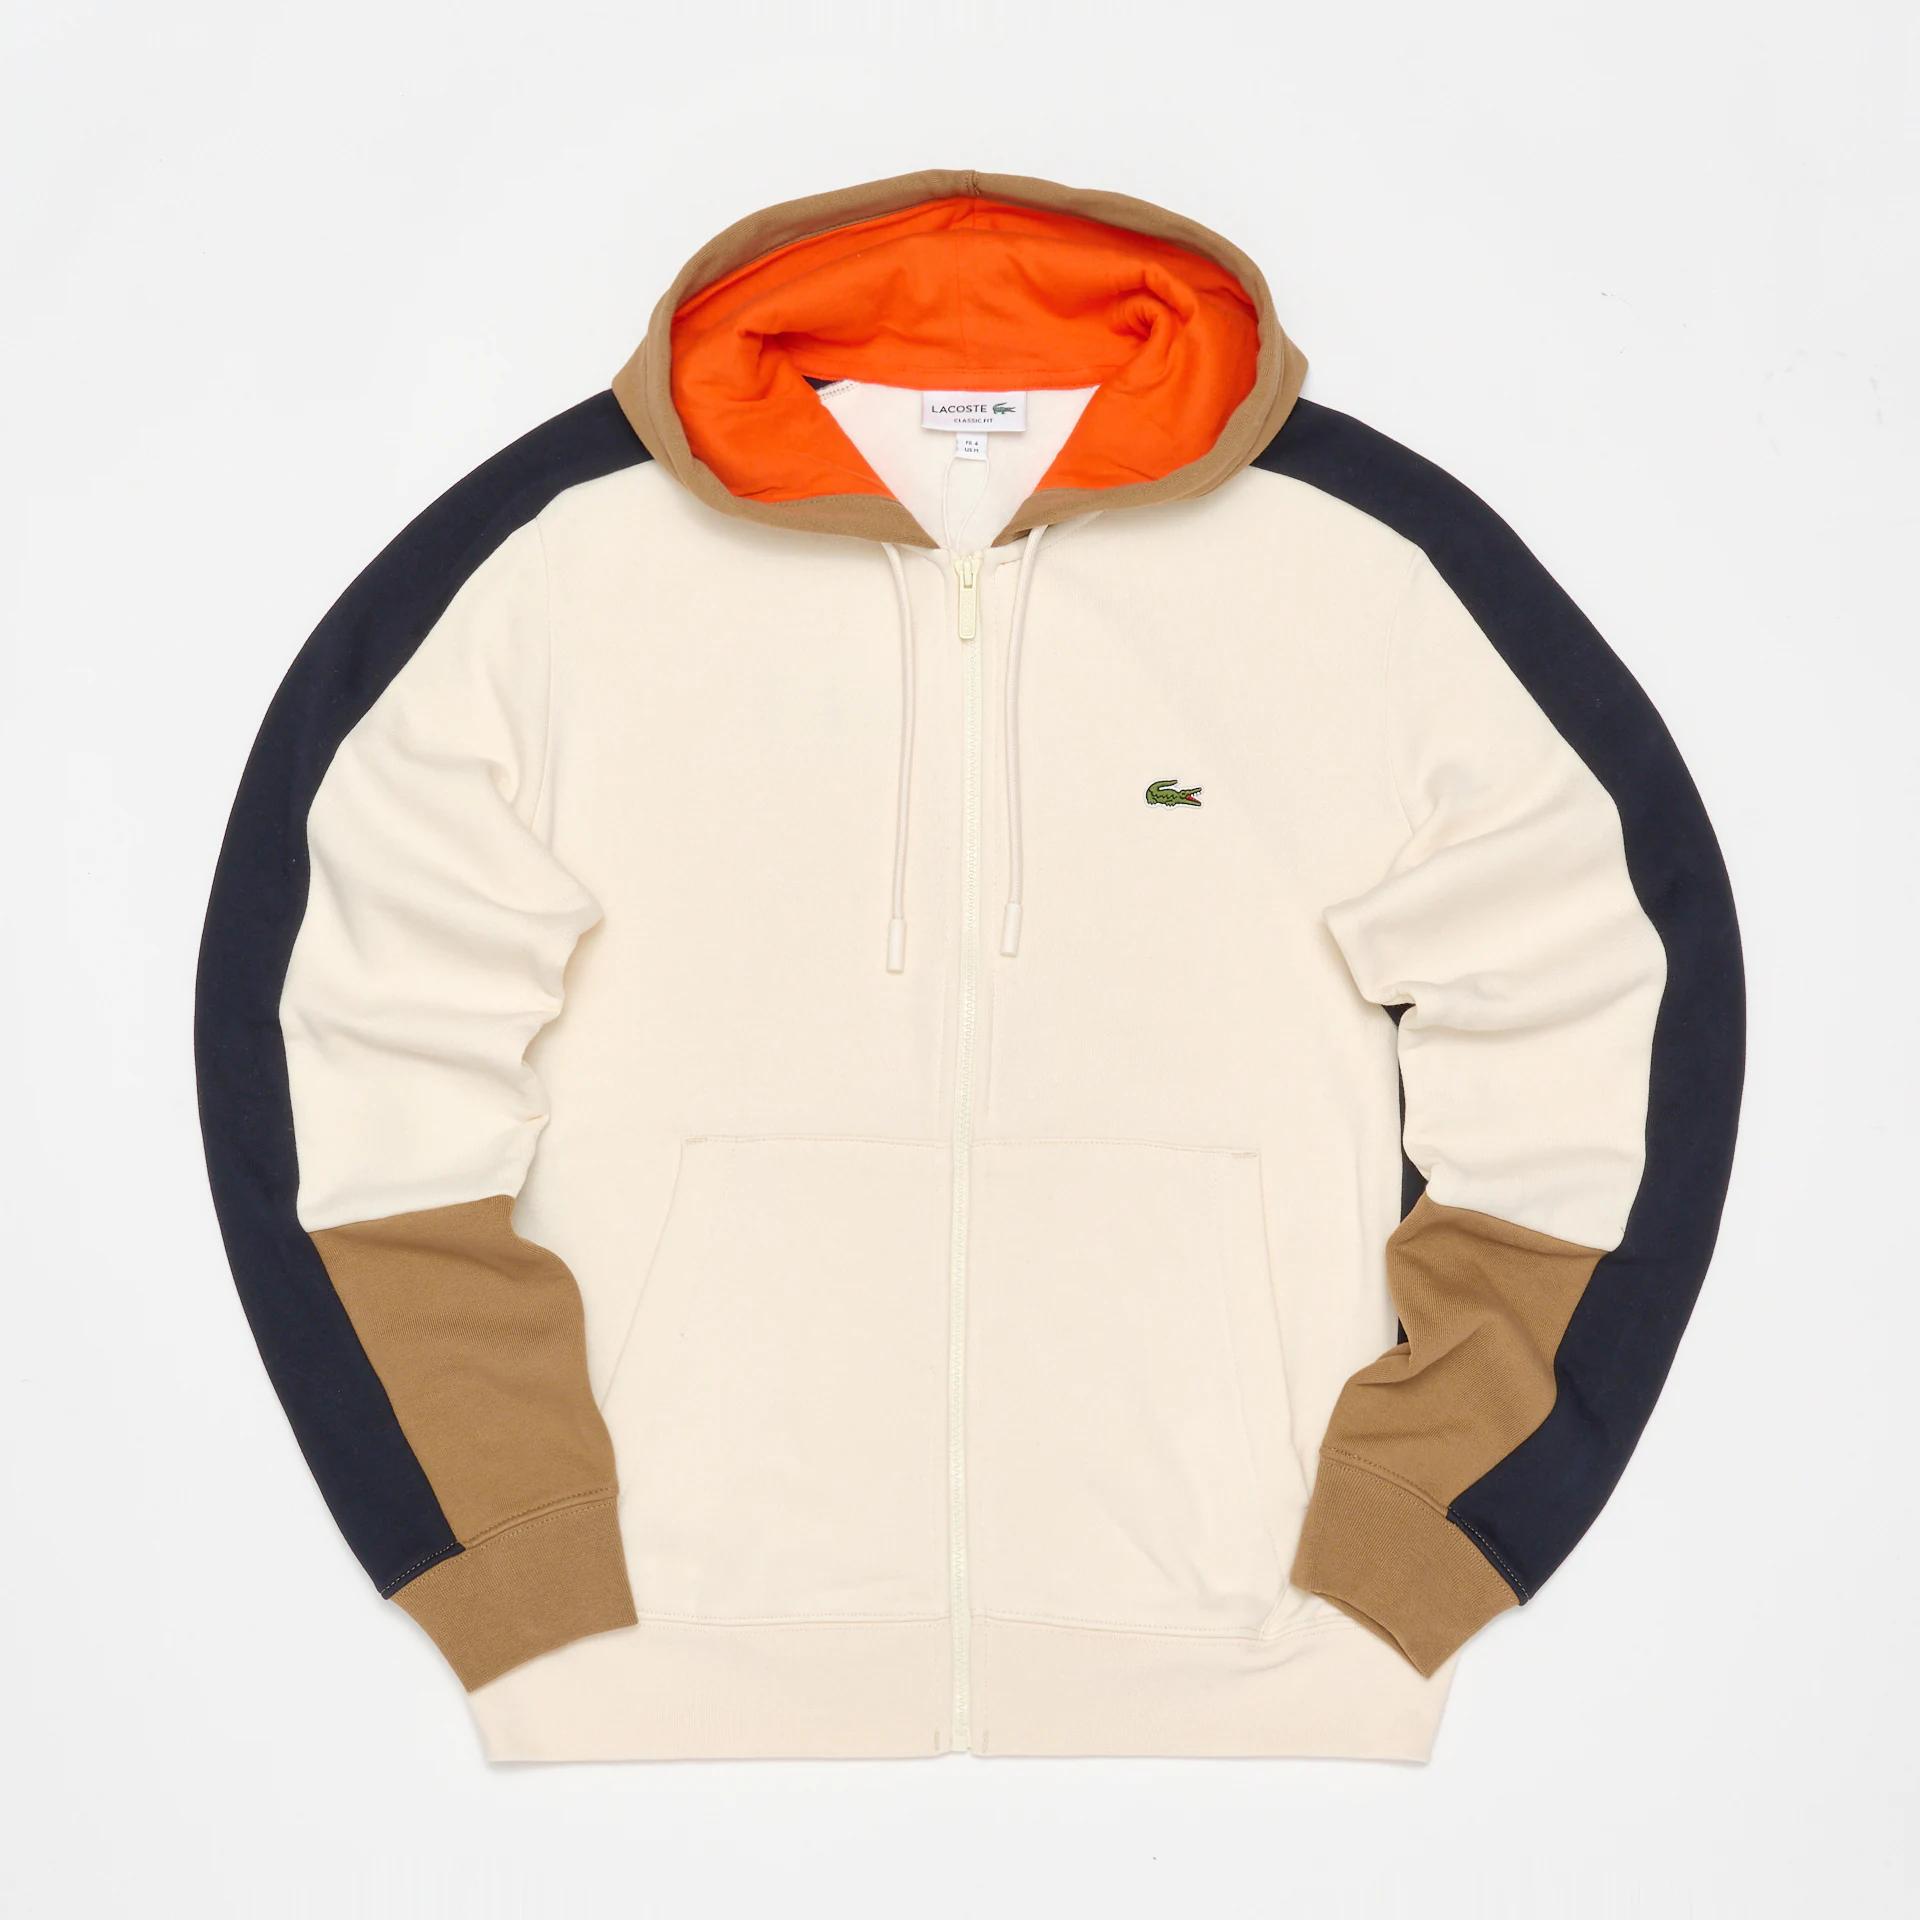 Lacoste Colorblock Hooded Sweatjacket Lapland/Cookie/Abysm